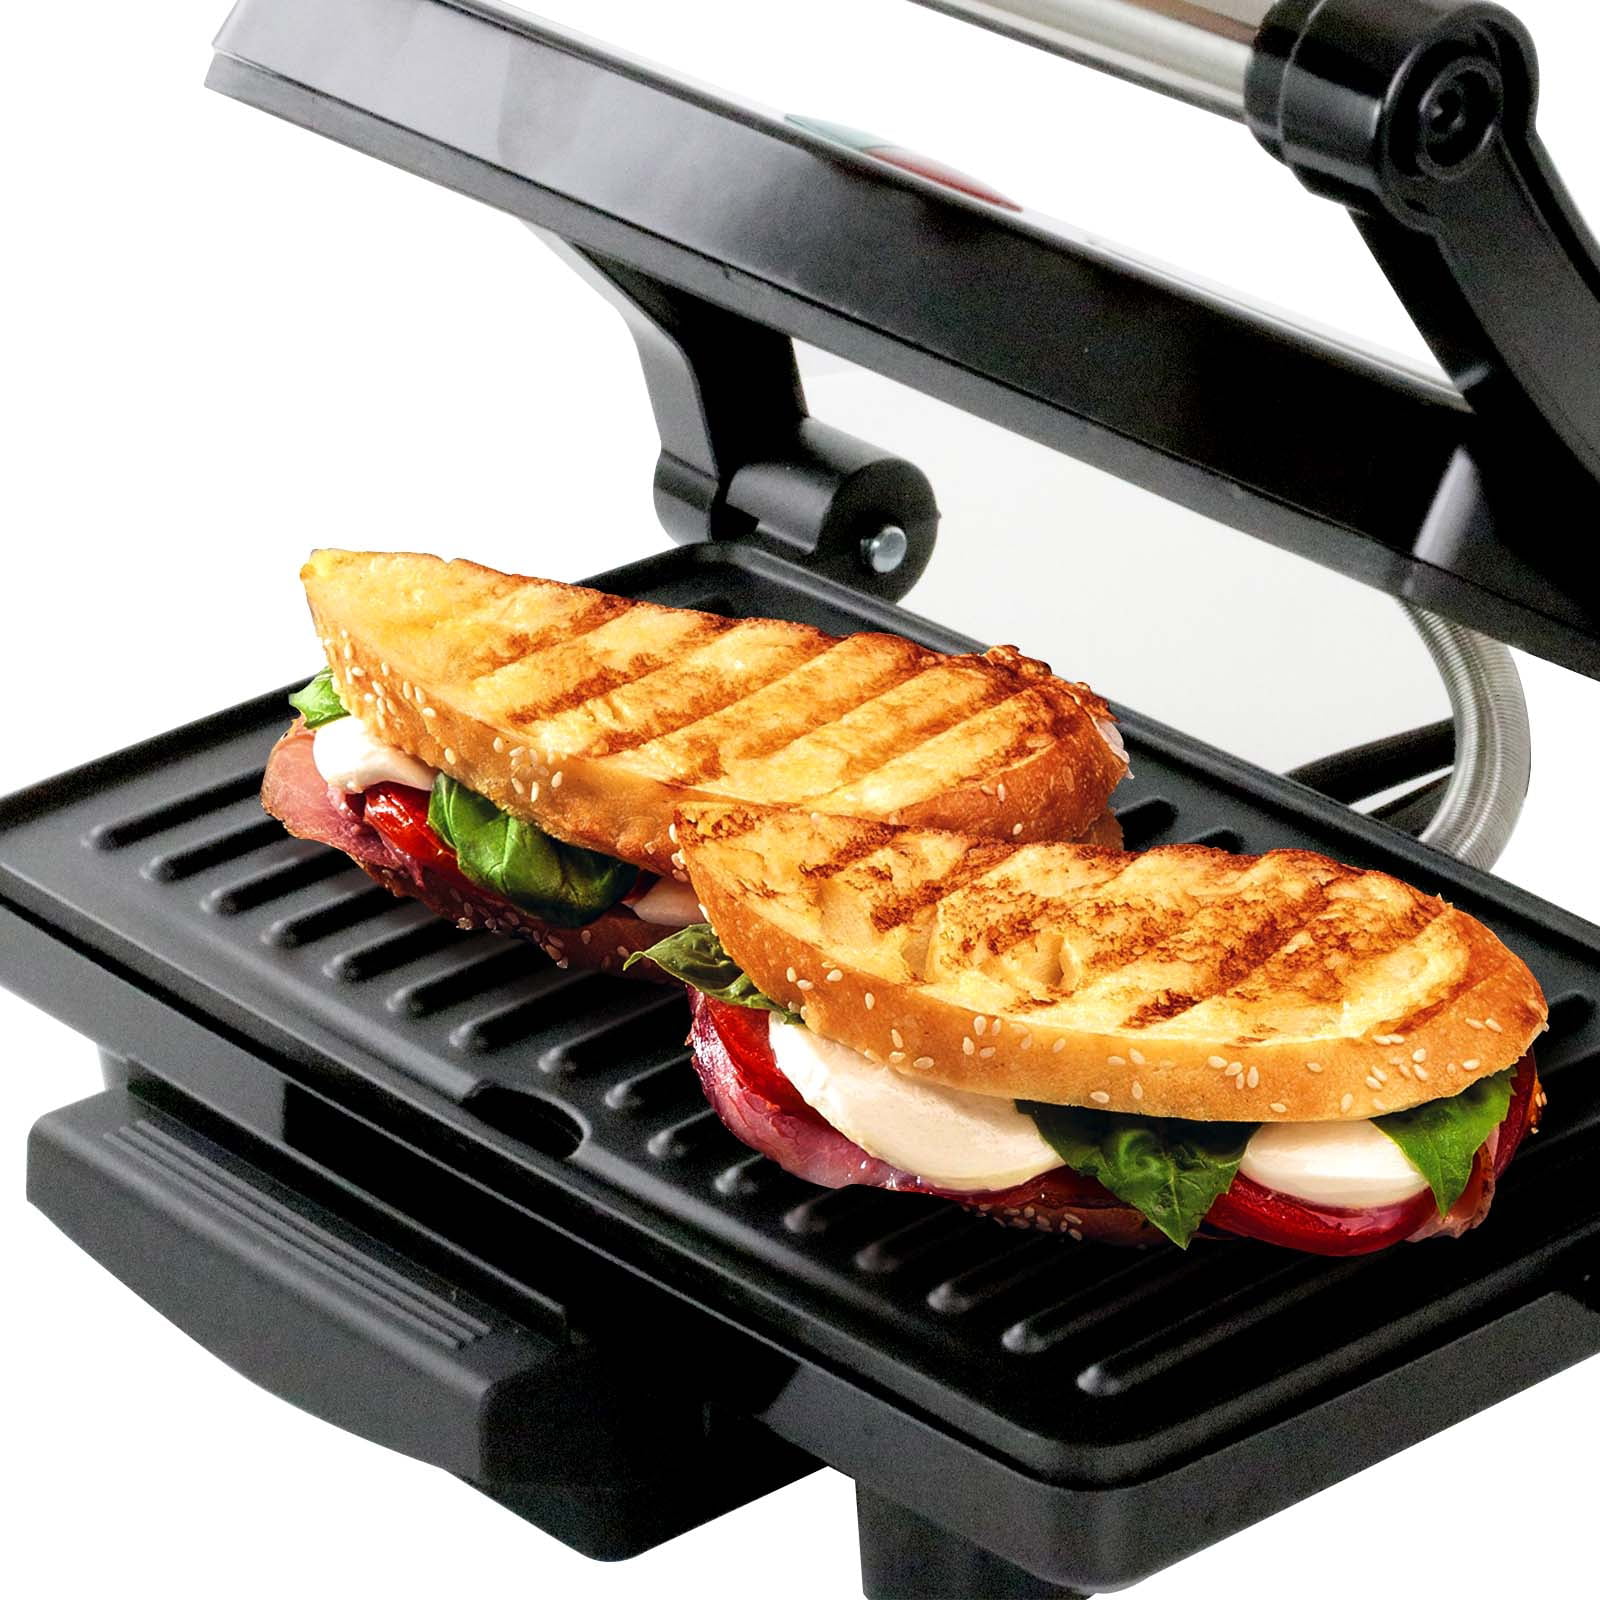 Betterlifefg-sandwich Maker, Lightweight And Portable Double Sided Heating  Non-stick Pan, Grill Appliance With Eu Adapter, Paninis, Sandwiches 0% Bpa